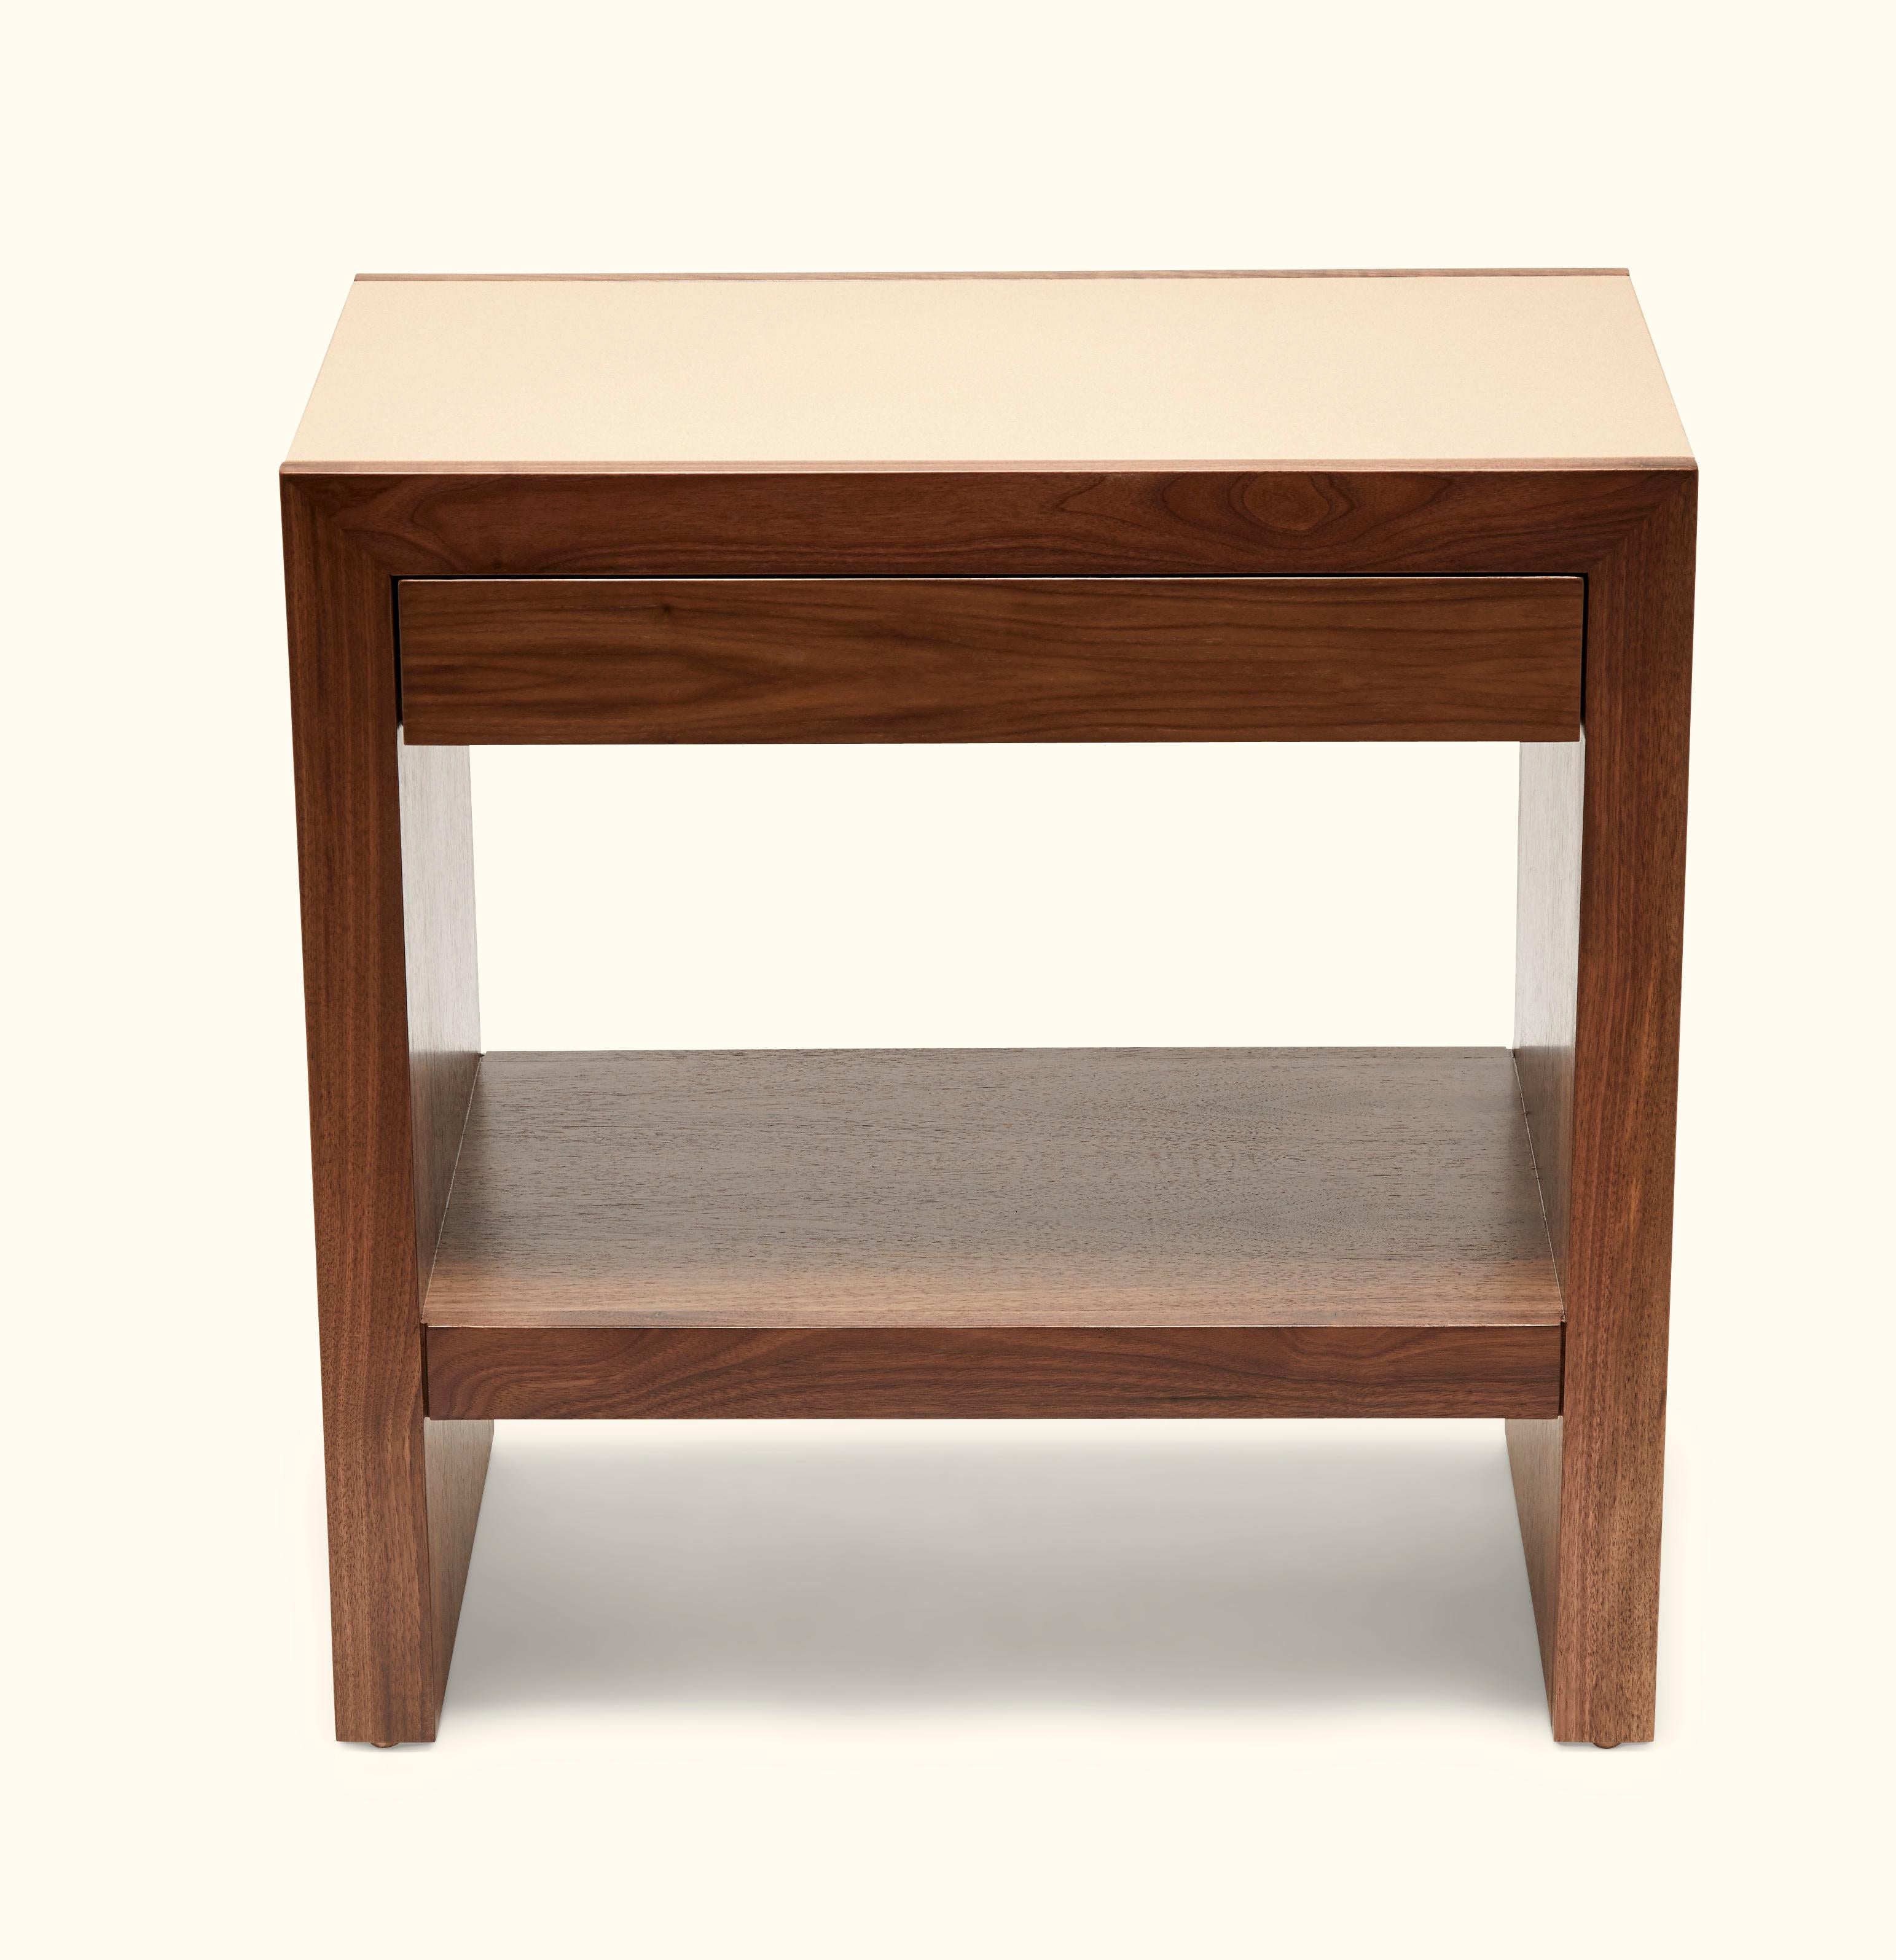 The Parkman nightstand features a Parsons-style waterfall shape with cork on the top and sides and one drawer. Available in American walnut and oak and 5 different cork colors. Shown here in natural walnut and champagne cork. 

Cork and Walnut